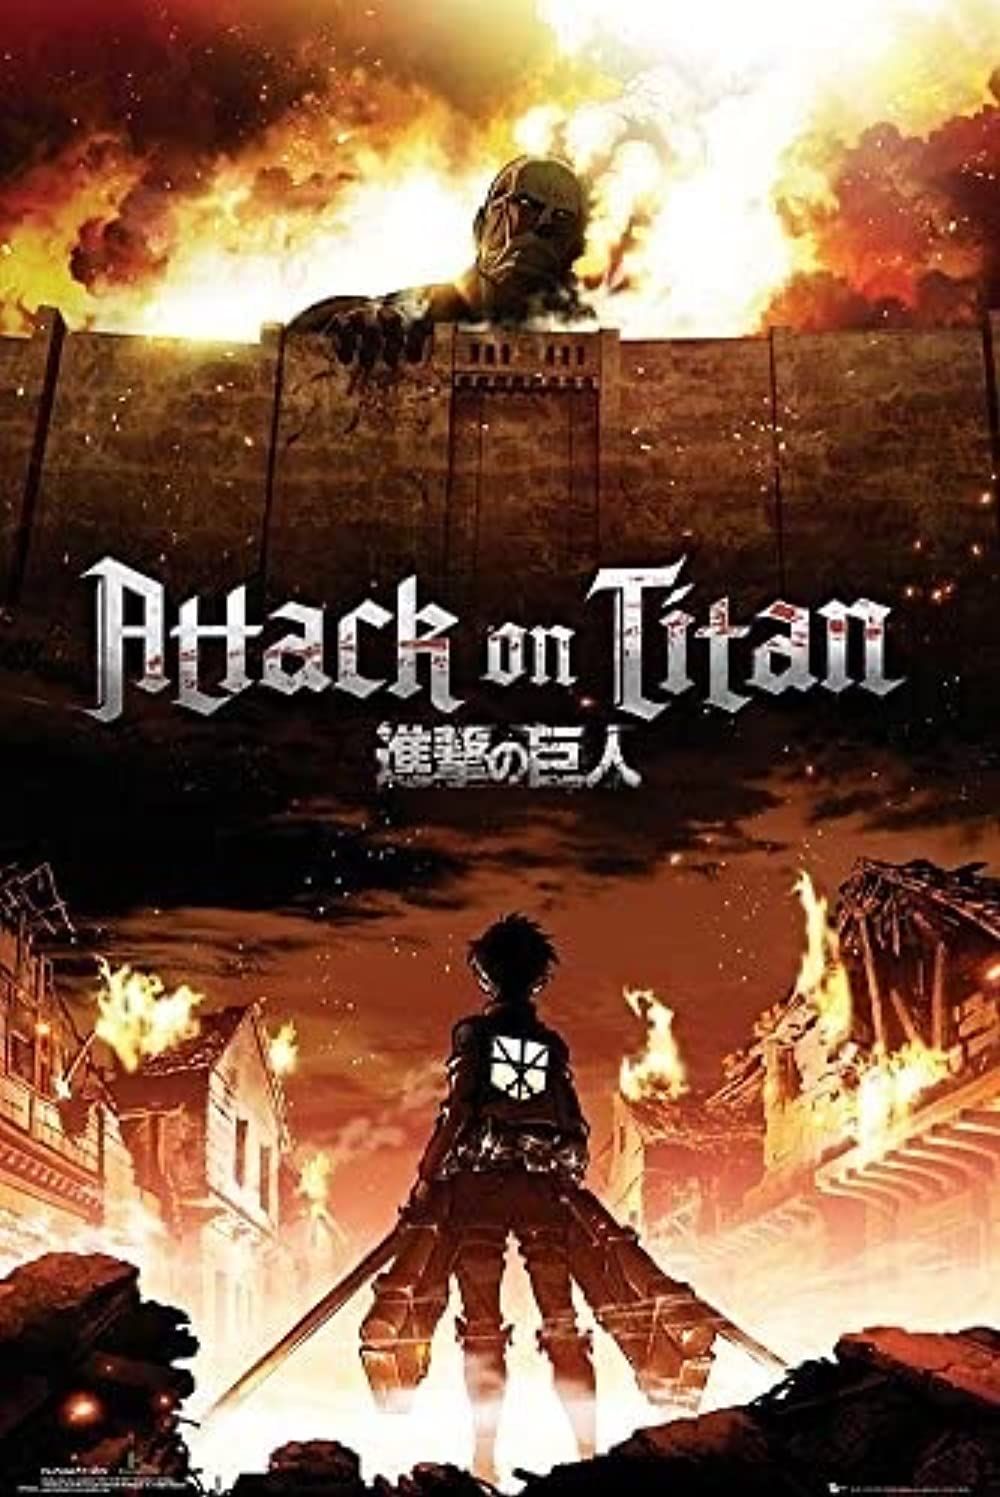 Attack on Titan Final Season Part 3: Release Date, How to Watch